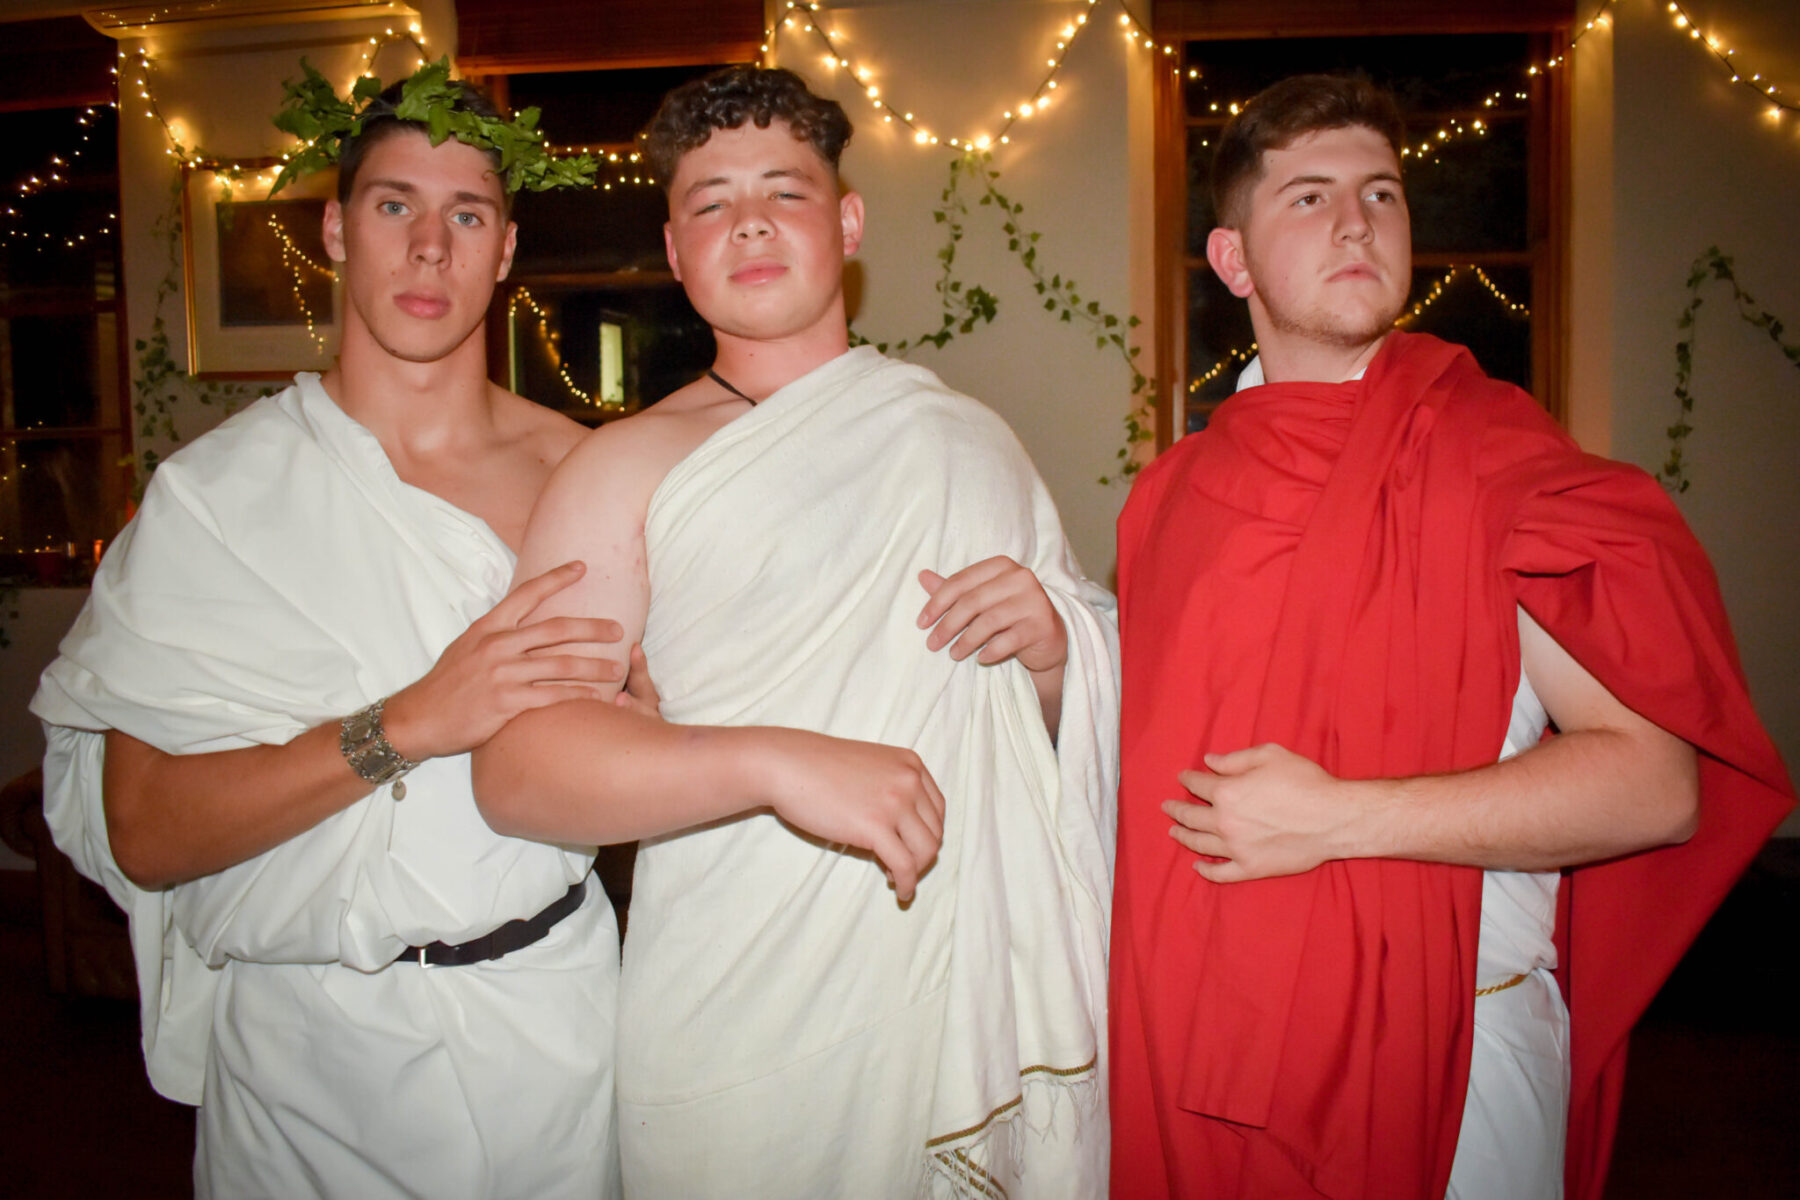 Classics-Week-Toga-Party-2021-Edited-9-scaled-1. Campion College Australia.